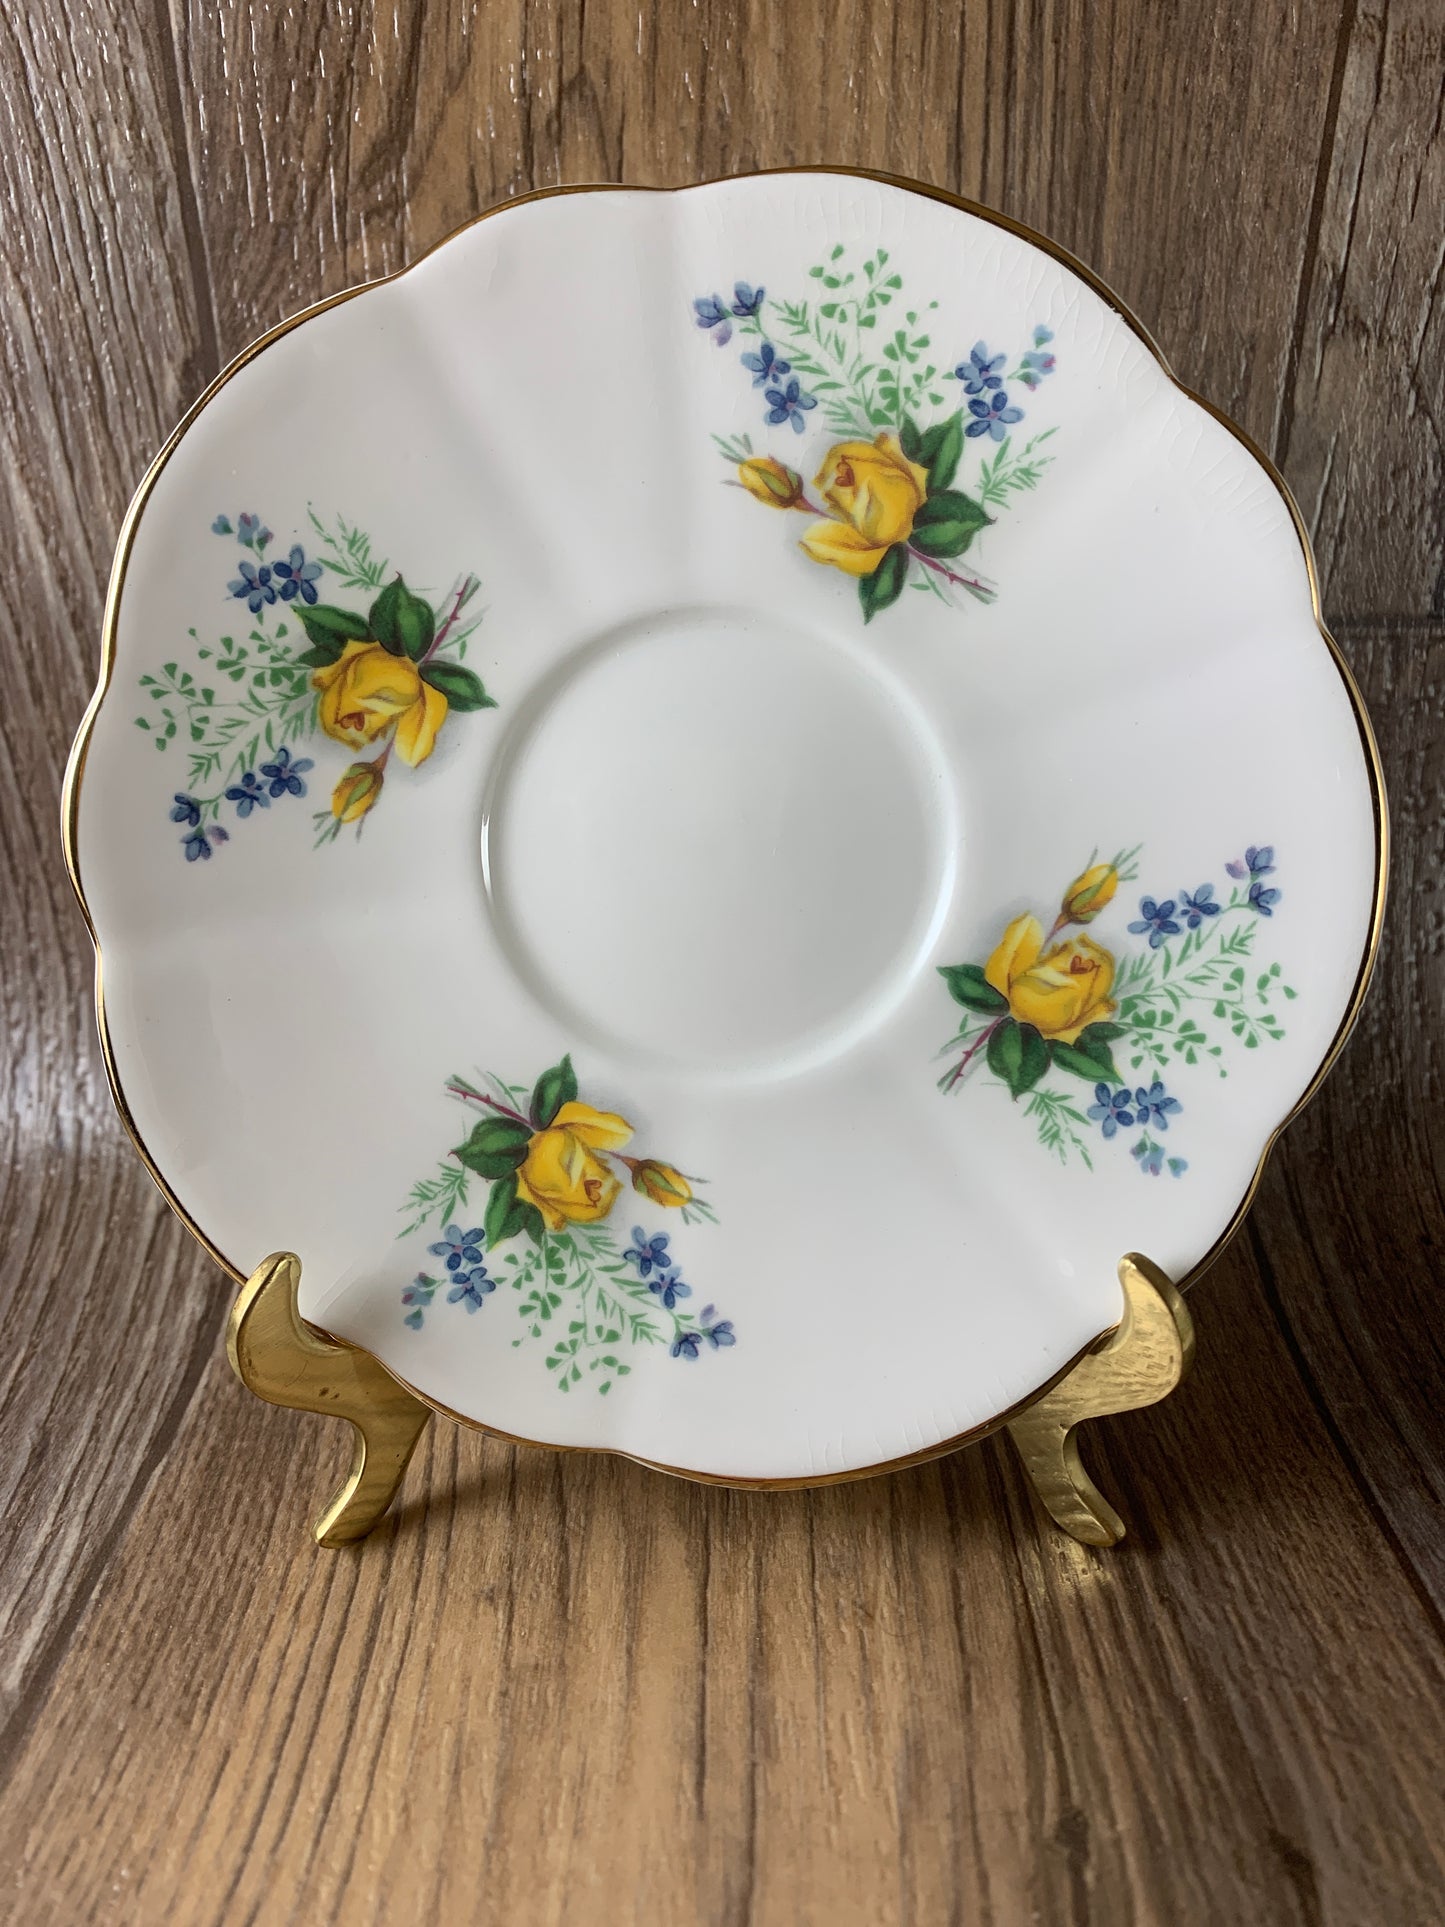 Yellow and Blue Floral Teacup and Saucer